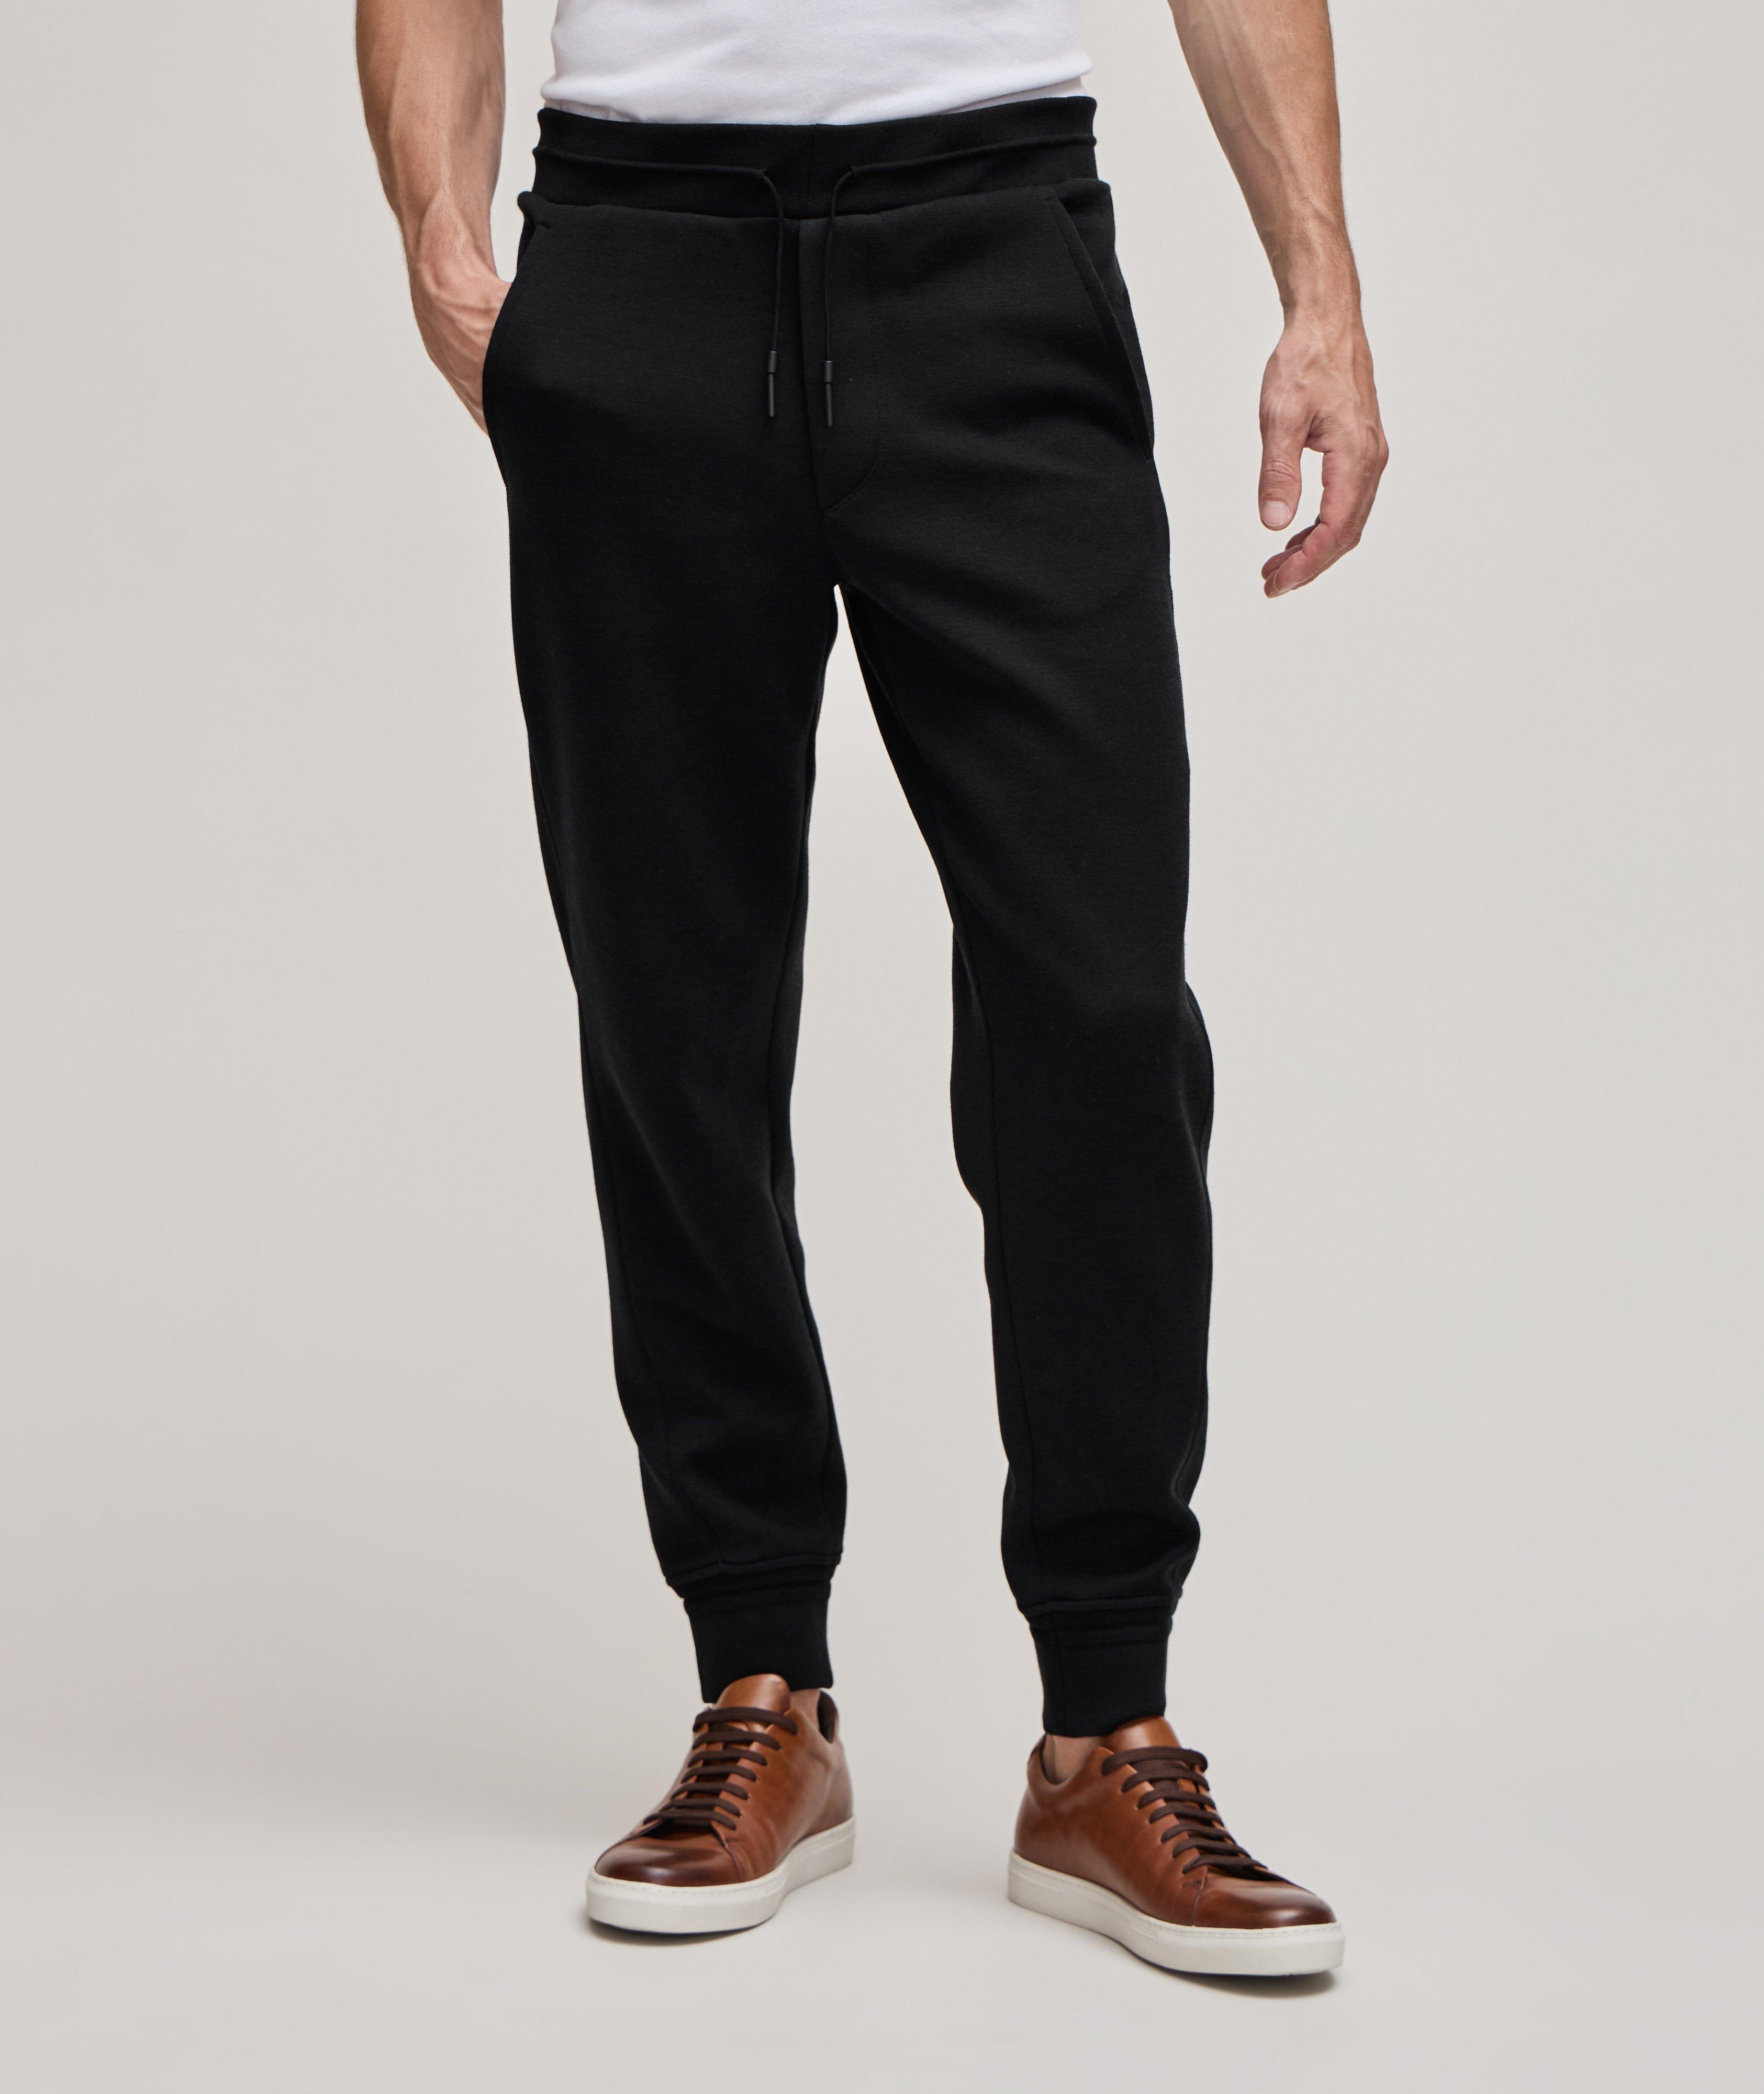 Ribbed Joggers from West & Grey The Label. Discover ethically